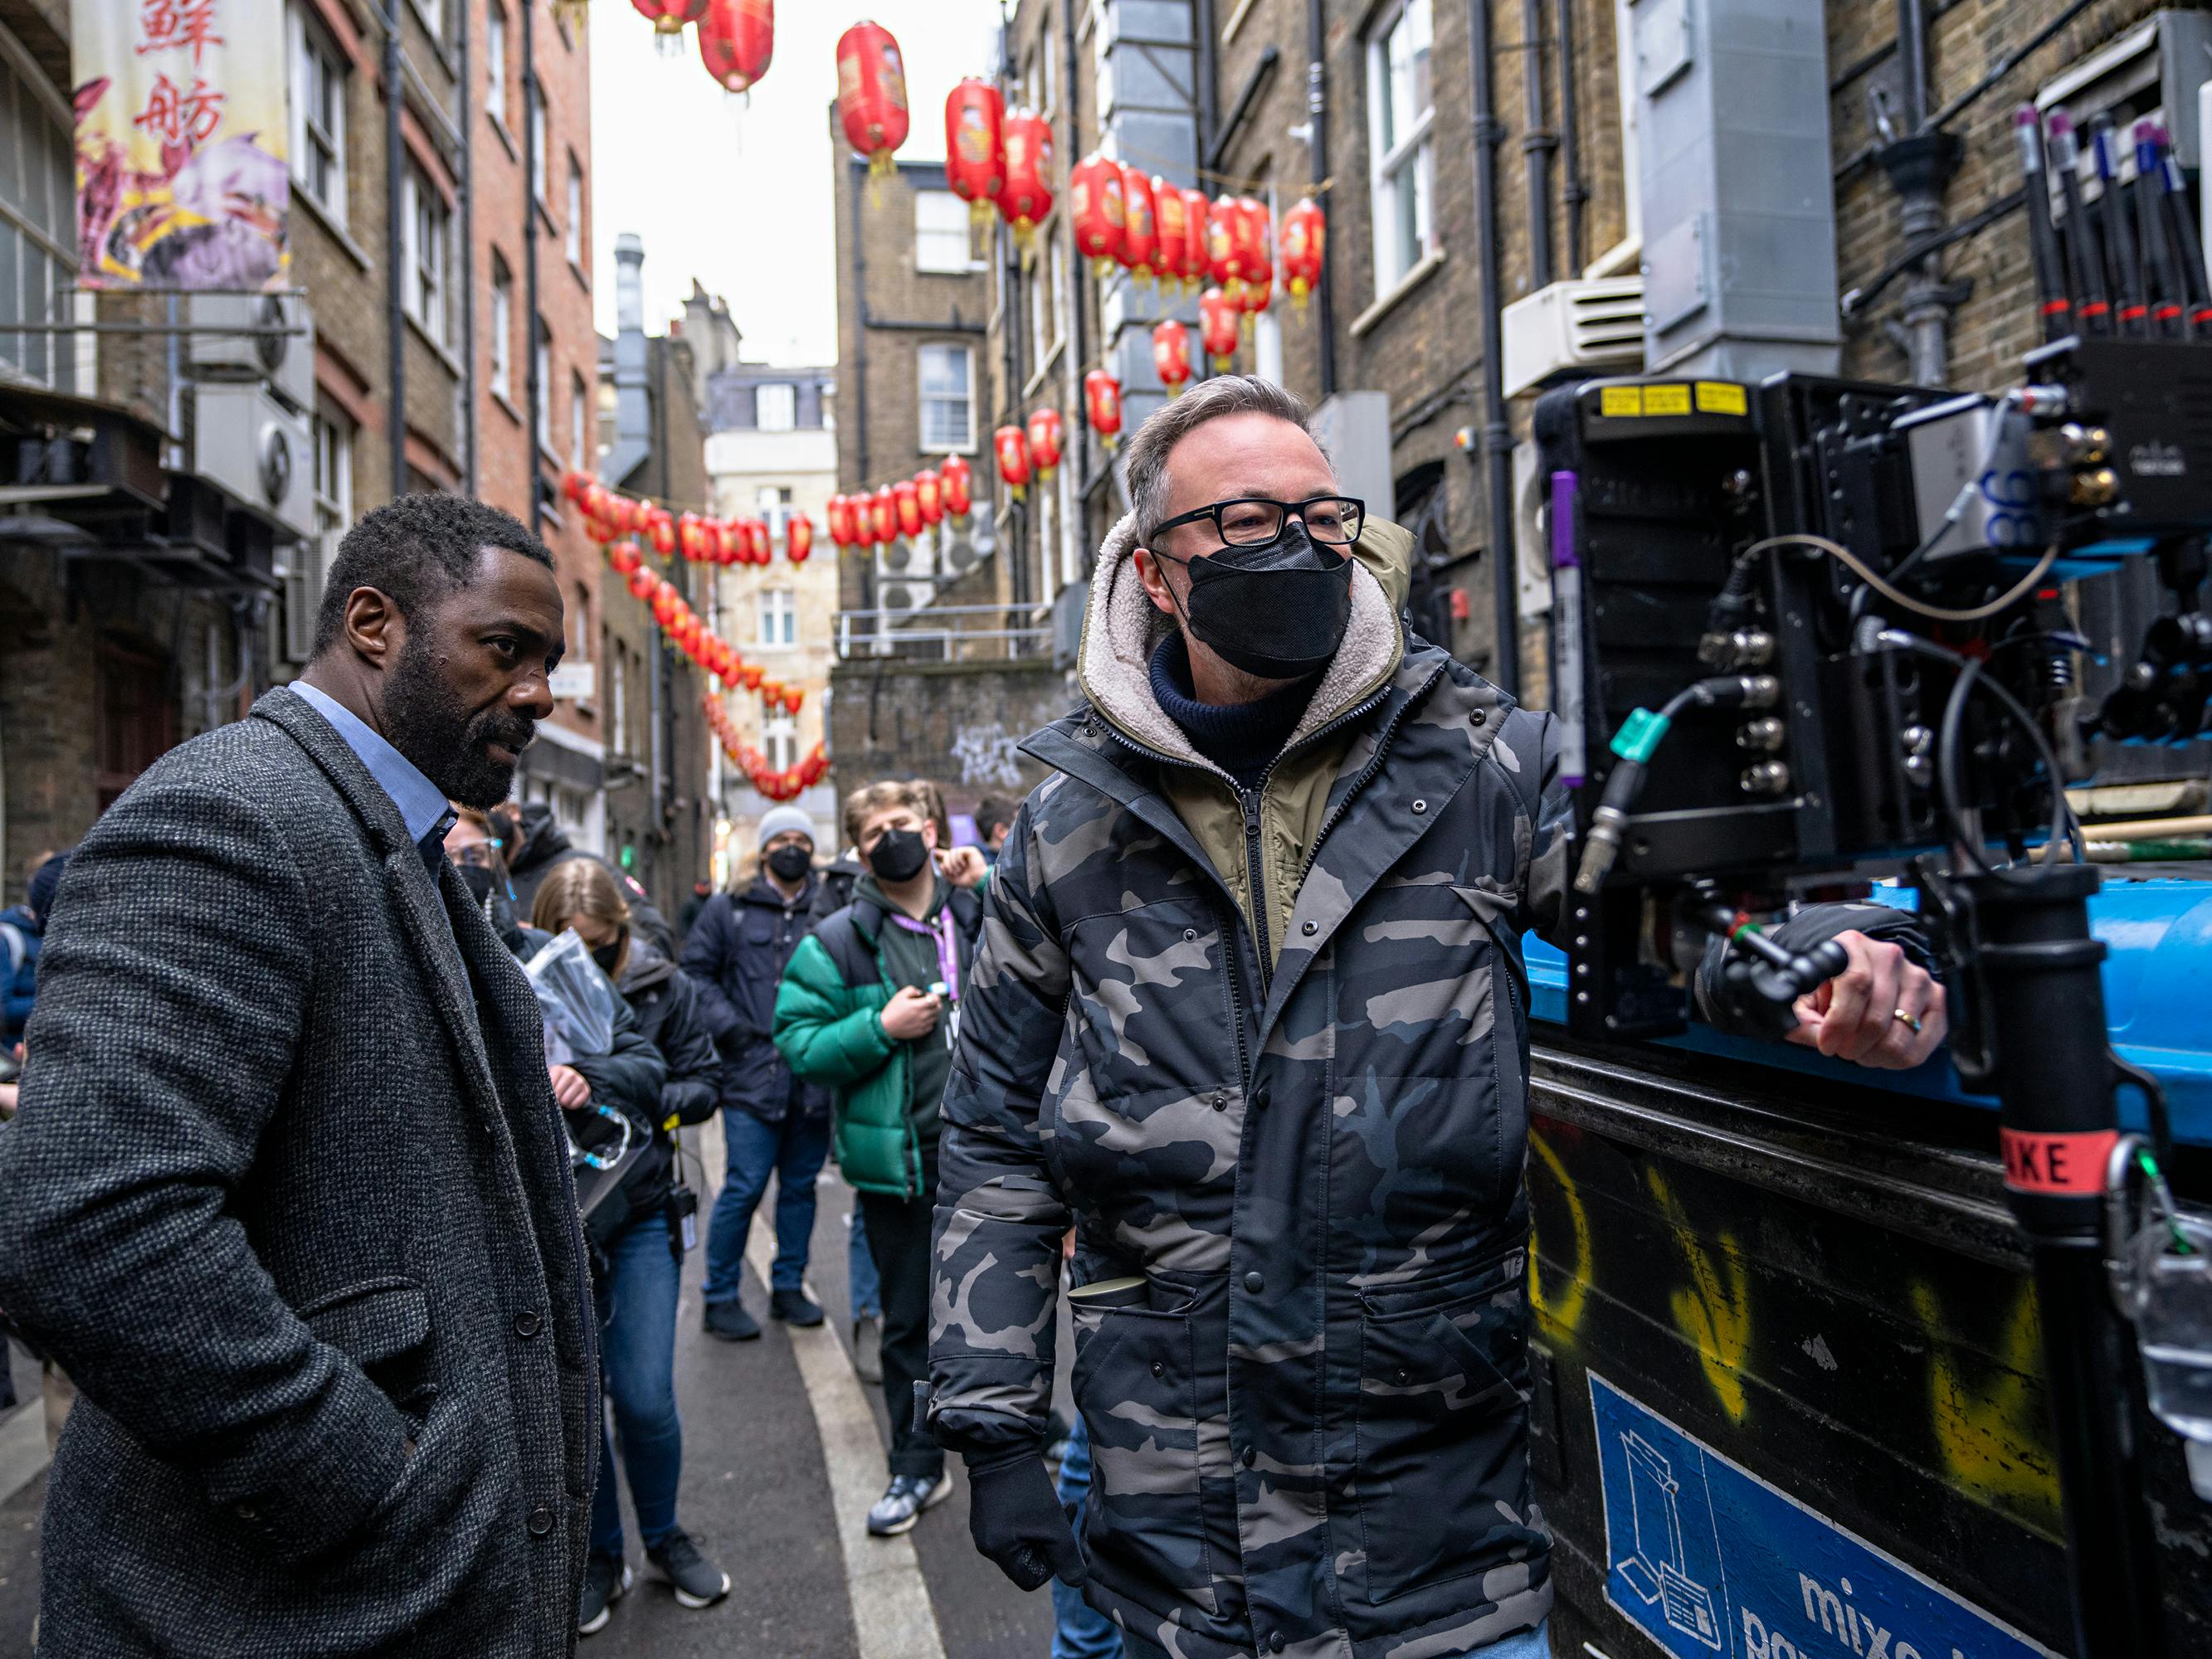 Idris Elba and James Payne behind the scenes, on a busy, narrow street.